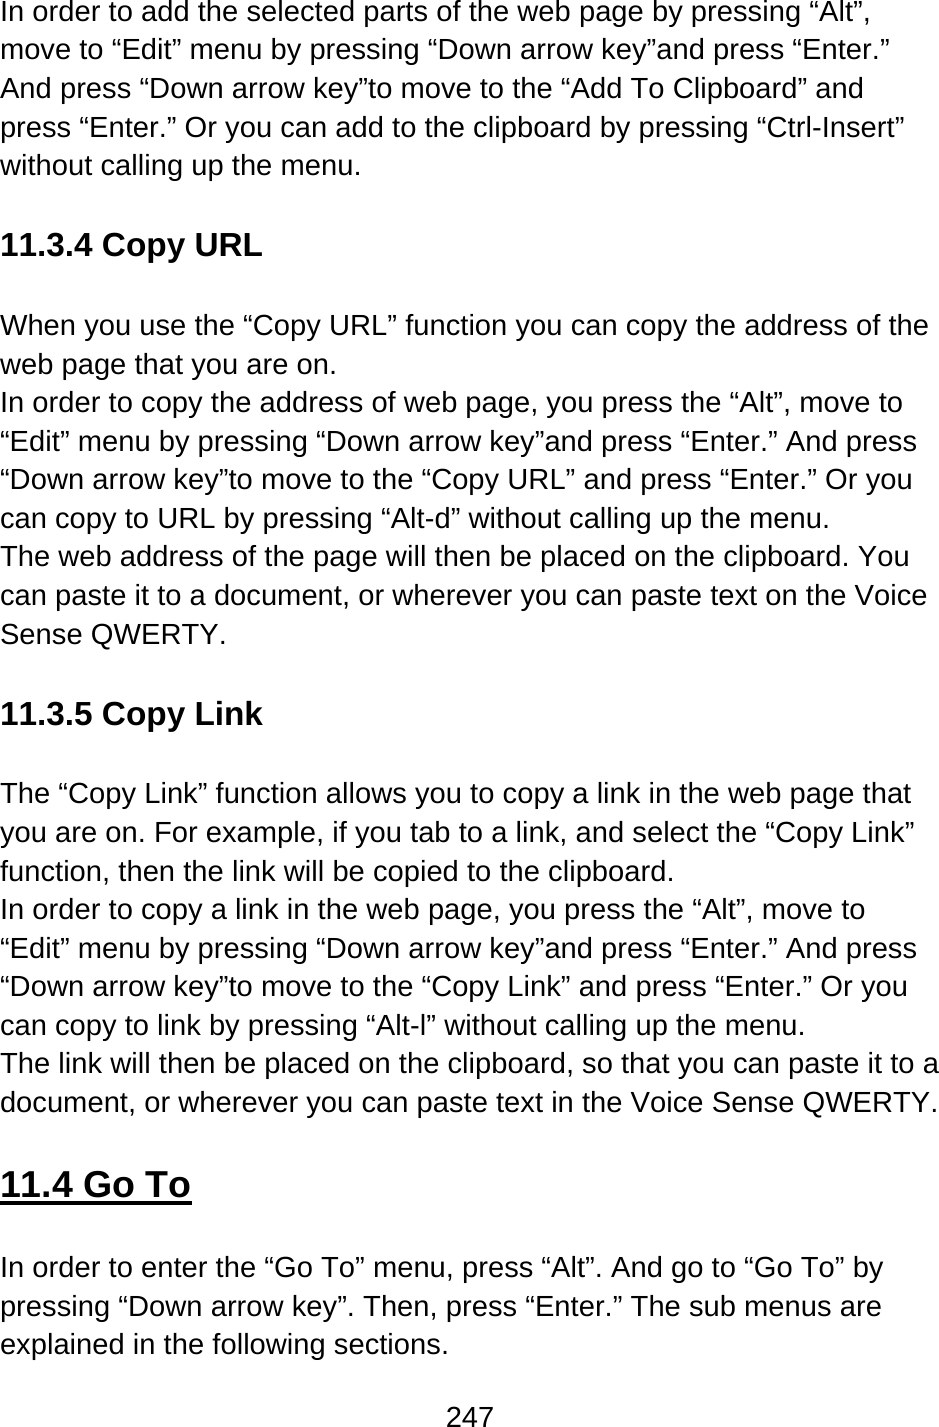 247  In order to add the selected parts of the web page by pressing “Alt”, move to “Edit” menu by pressing “Down arrow key”and press “Enter.” And press “Down arrow key”to move to the “Add To Clipboard” and press “Enter.” Or you can add to the clipboard by pressing “Ctrl-Insert” without calling up the menu.  11.3.4 Copy URL  When you use the “Copy URL” function you can copy the address of the web page that you are on.     In order to copy the address of web page, you press the “Alt”, move to “Edit” menu by pressing “Down arrow key”and press “Enter.” And press “Down arrow key”to move to the “Copy URL” and press “Enter.” Or you can copy to URL by pressing “Alt-d” without calling up the menu.   The web address of the page will then be placed on the clipboard. You can paste it to a document, or wherever you can paste text on the Voice Sense QWERTY.  11.3.5 Copy Link    The “Copy Link” function allows you to copy a link in the web page that you are on. For example, if you tab to a link, and select the “Copy Link” function, then the link will be copied to the clipboard.     In order to copy a link in the web page, you press the “Alt”, move to “Edit” menu by pressing “Down arrow key”and press “Enter.” And press “Down arrow key”to move to the “Copy Link” and press “Enter.” Or you can copy to link by pressing “Alt-l” without calling up the menu. The link will then be placed on the clipboard, so that you can paste it to a document, or wherever you can paste text in the Voice Sense QWERTY.  11.4 Go To  In order to enter the “Go To” menu, press “Alt”. And go to “Go To” by pressing “Down arrow key”. Then, press “Enter.” The sub menus are explained in the following sections.  